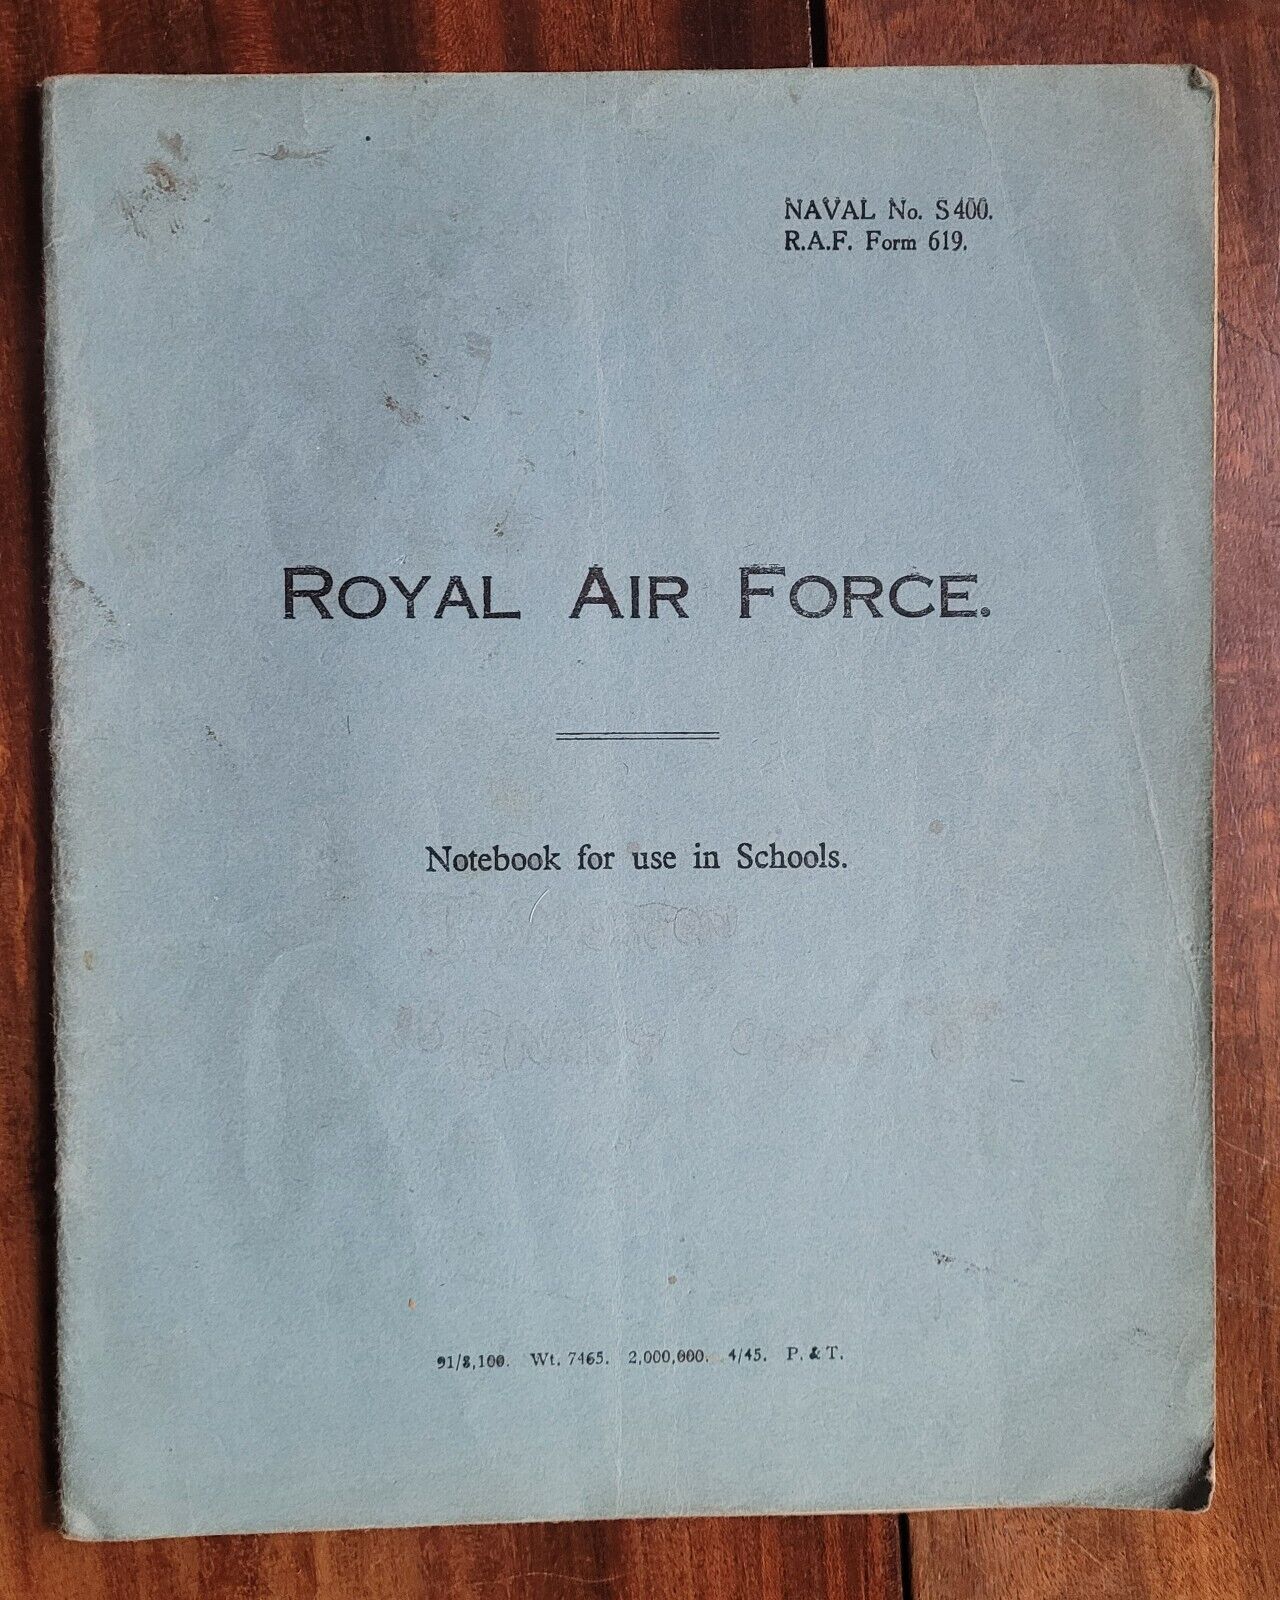 c1940s Royal Air Force Notebook. With Hand Drawn Electrical Engineering Diagrams